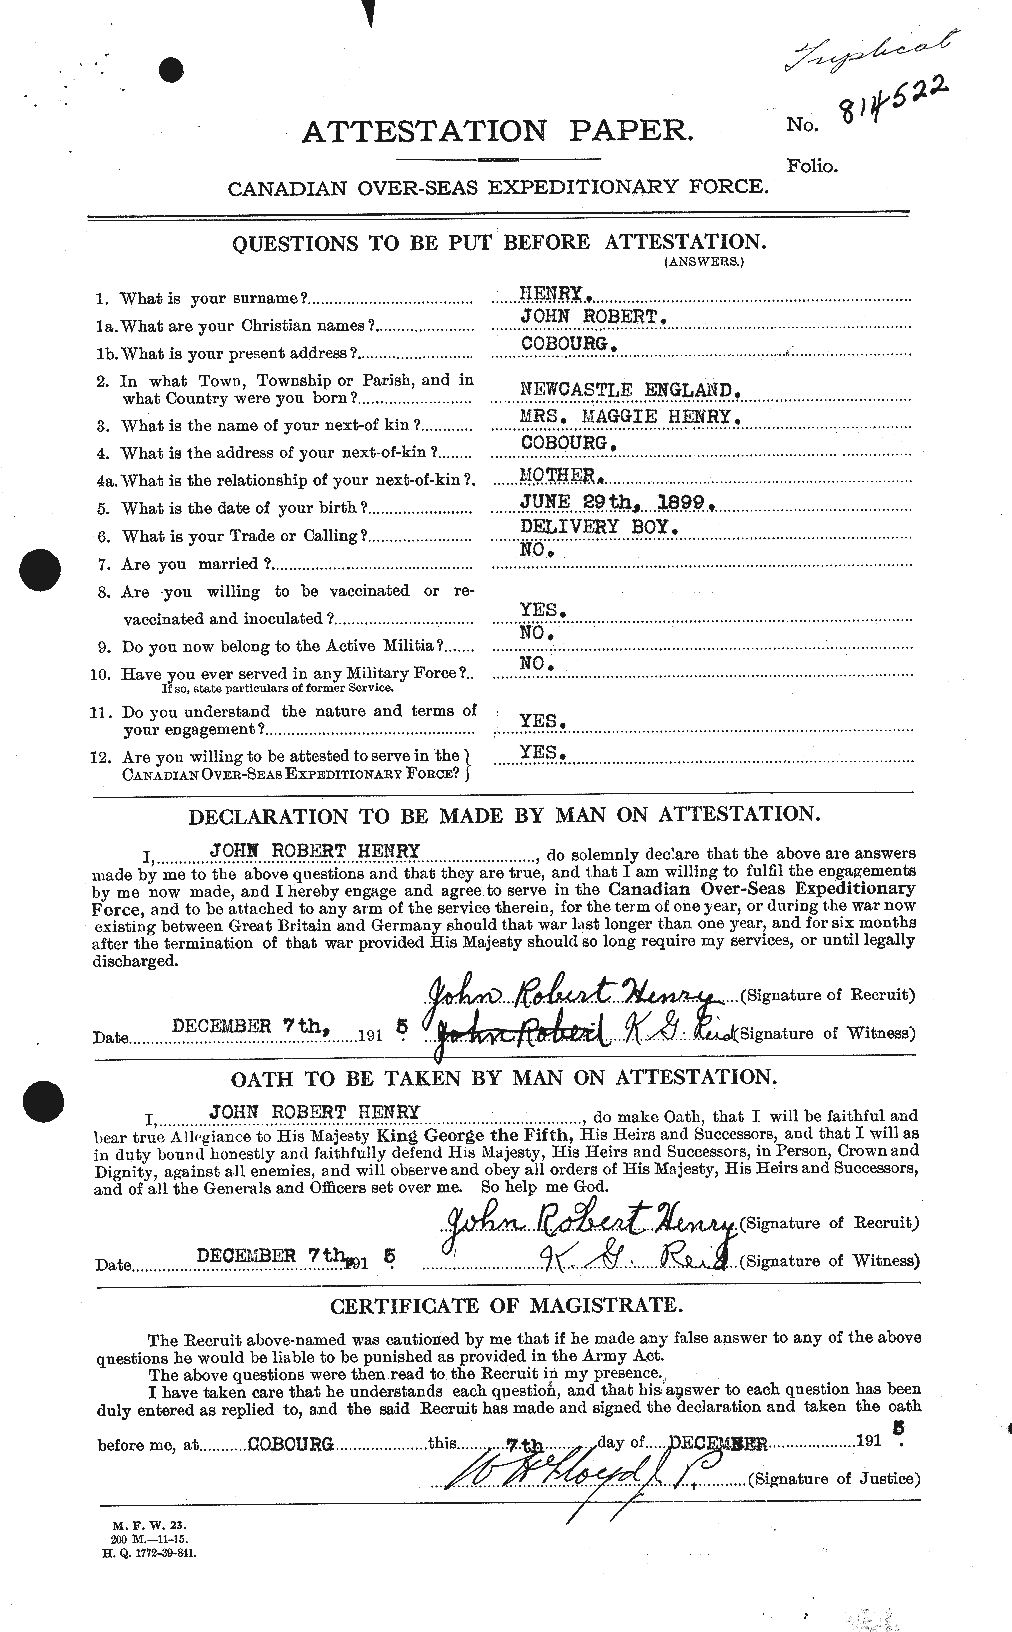 Personnel Records of the First World War - CEF 387630a